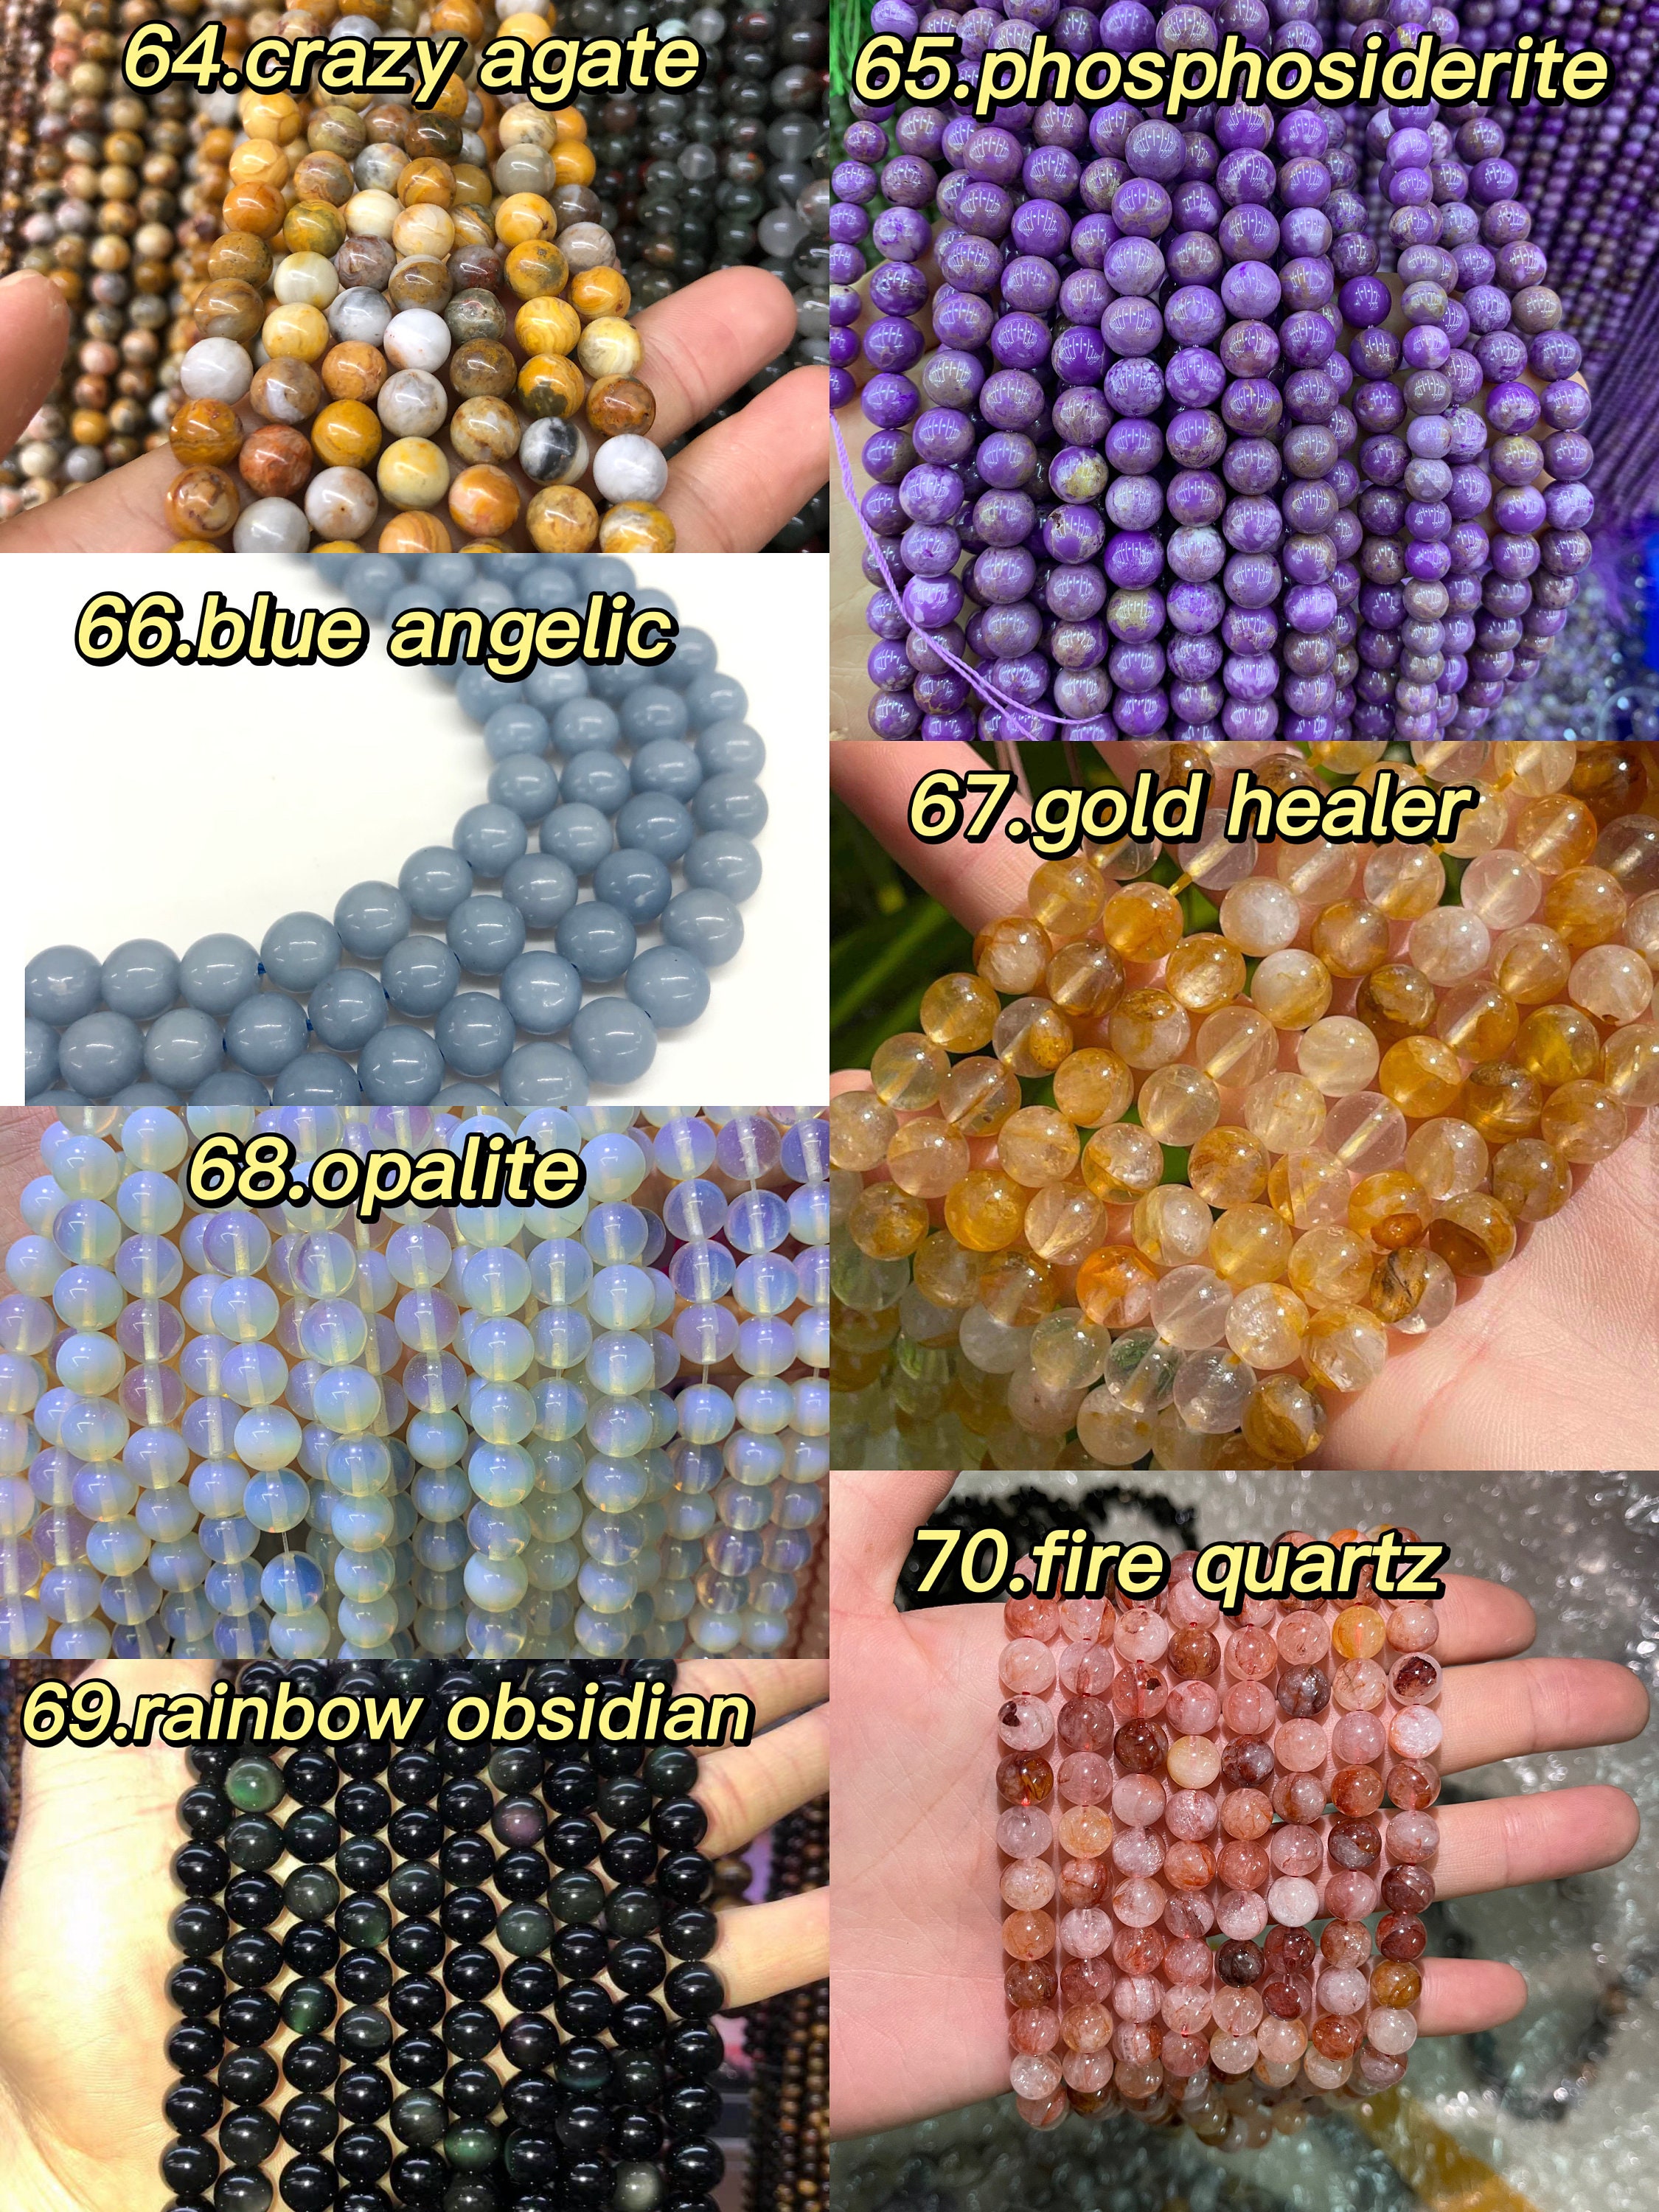 Wholesale 50pcs/lot fashion hot selling natural stone pink round ball shape  no hole 8mm beads for jewelry making free